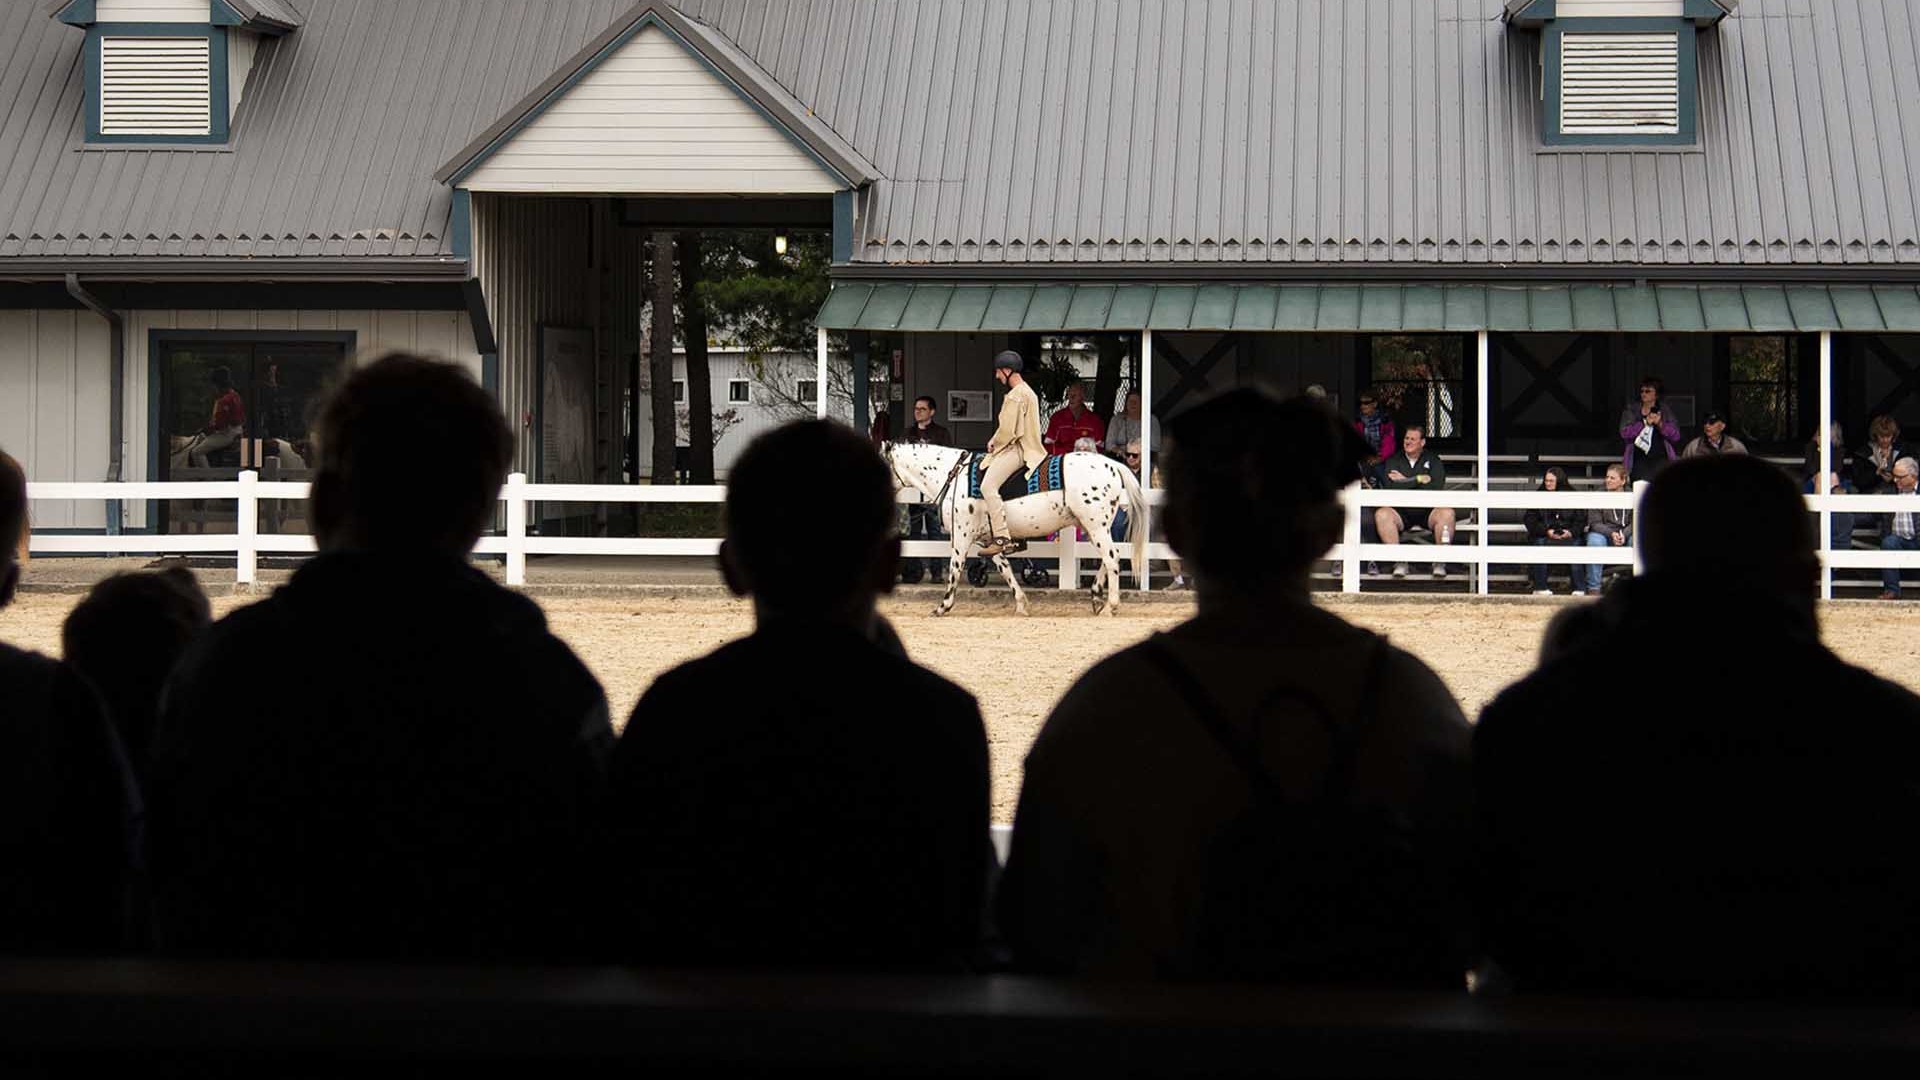 silhouettes of students watching horse show